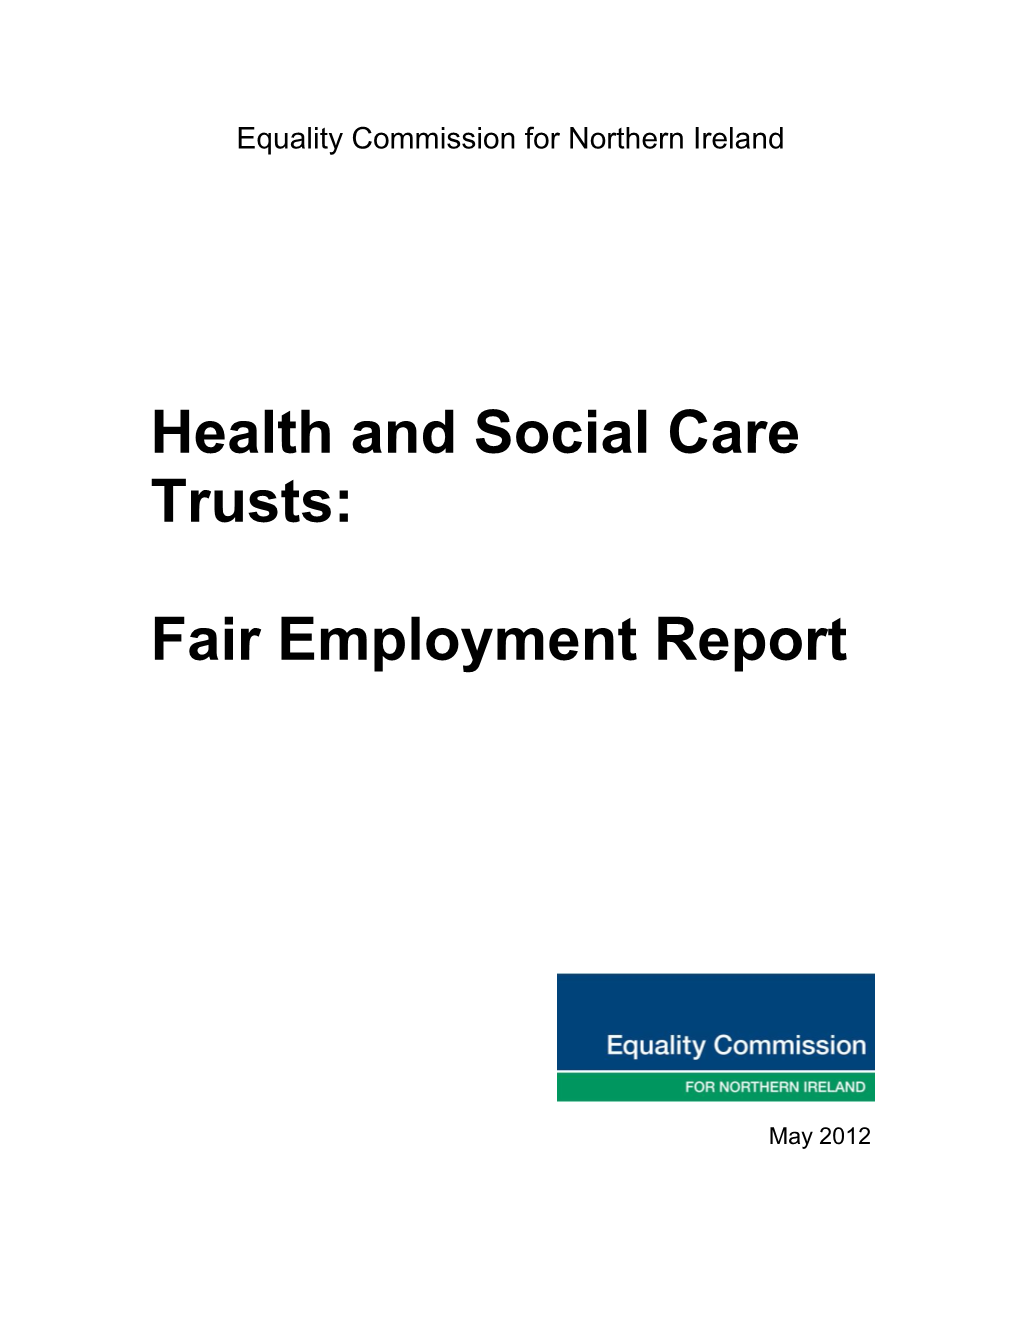 Health and Social Care Trusts